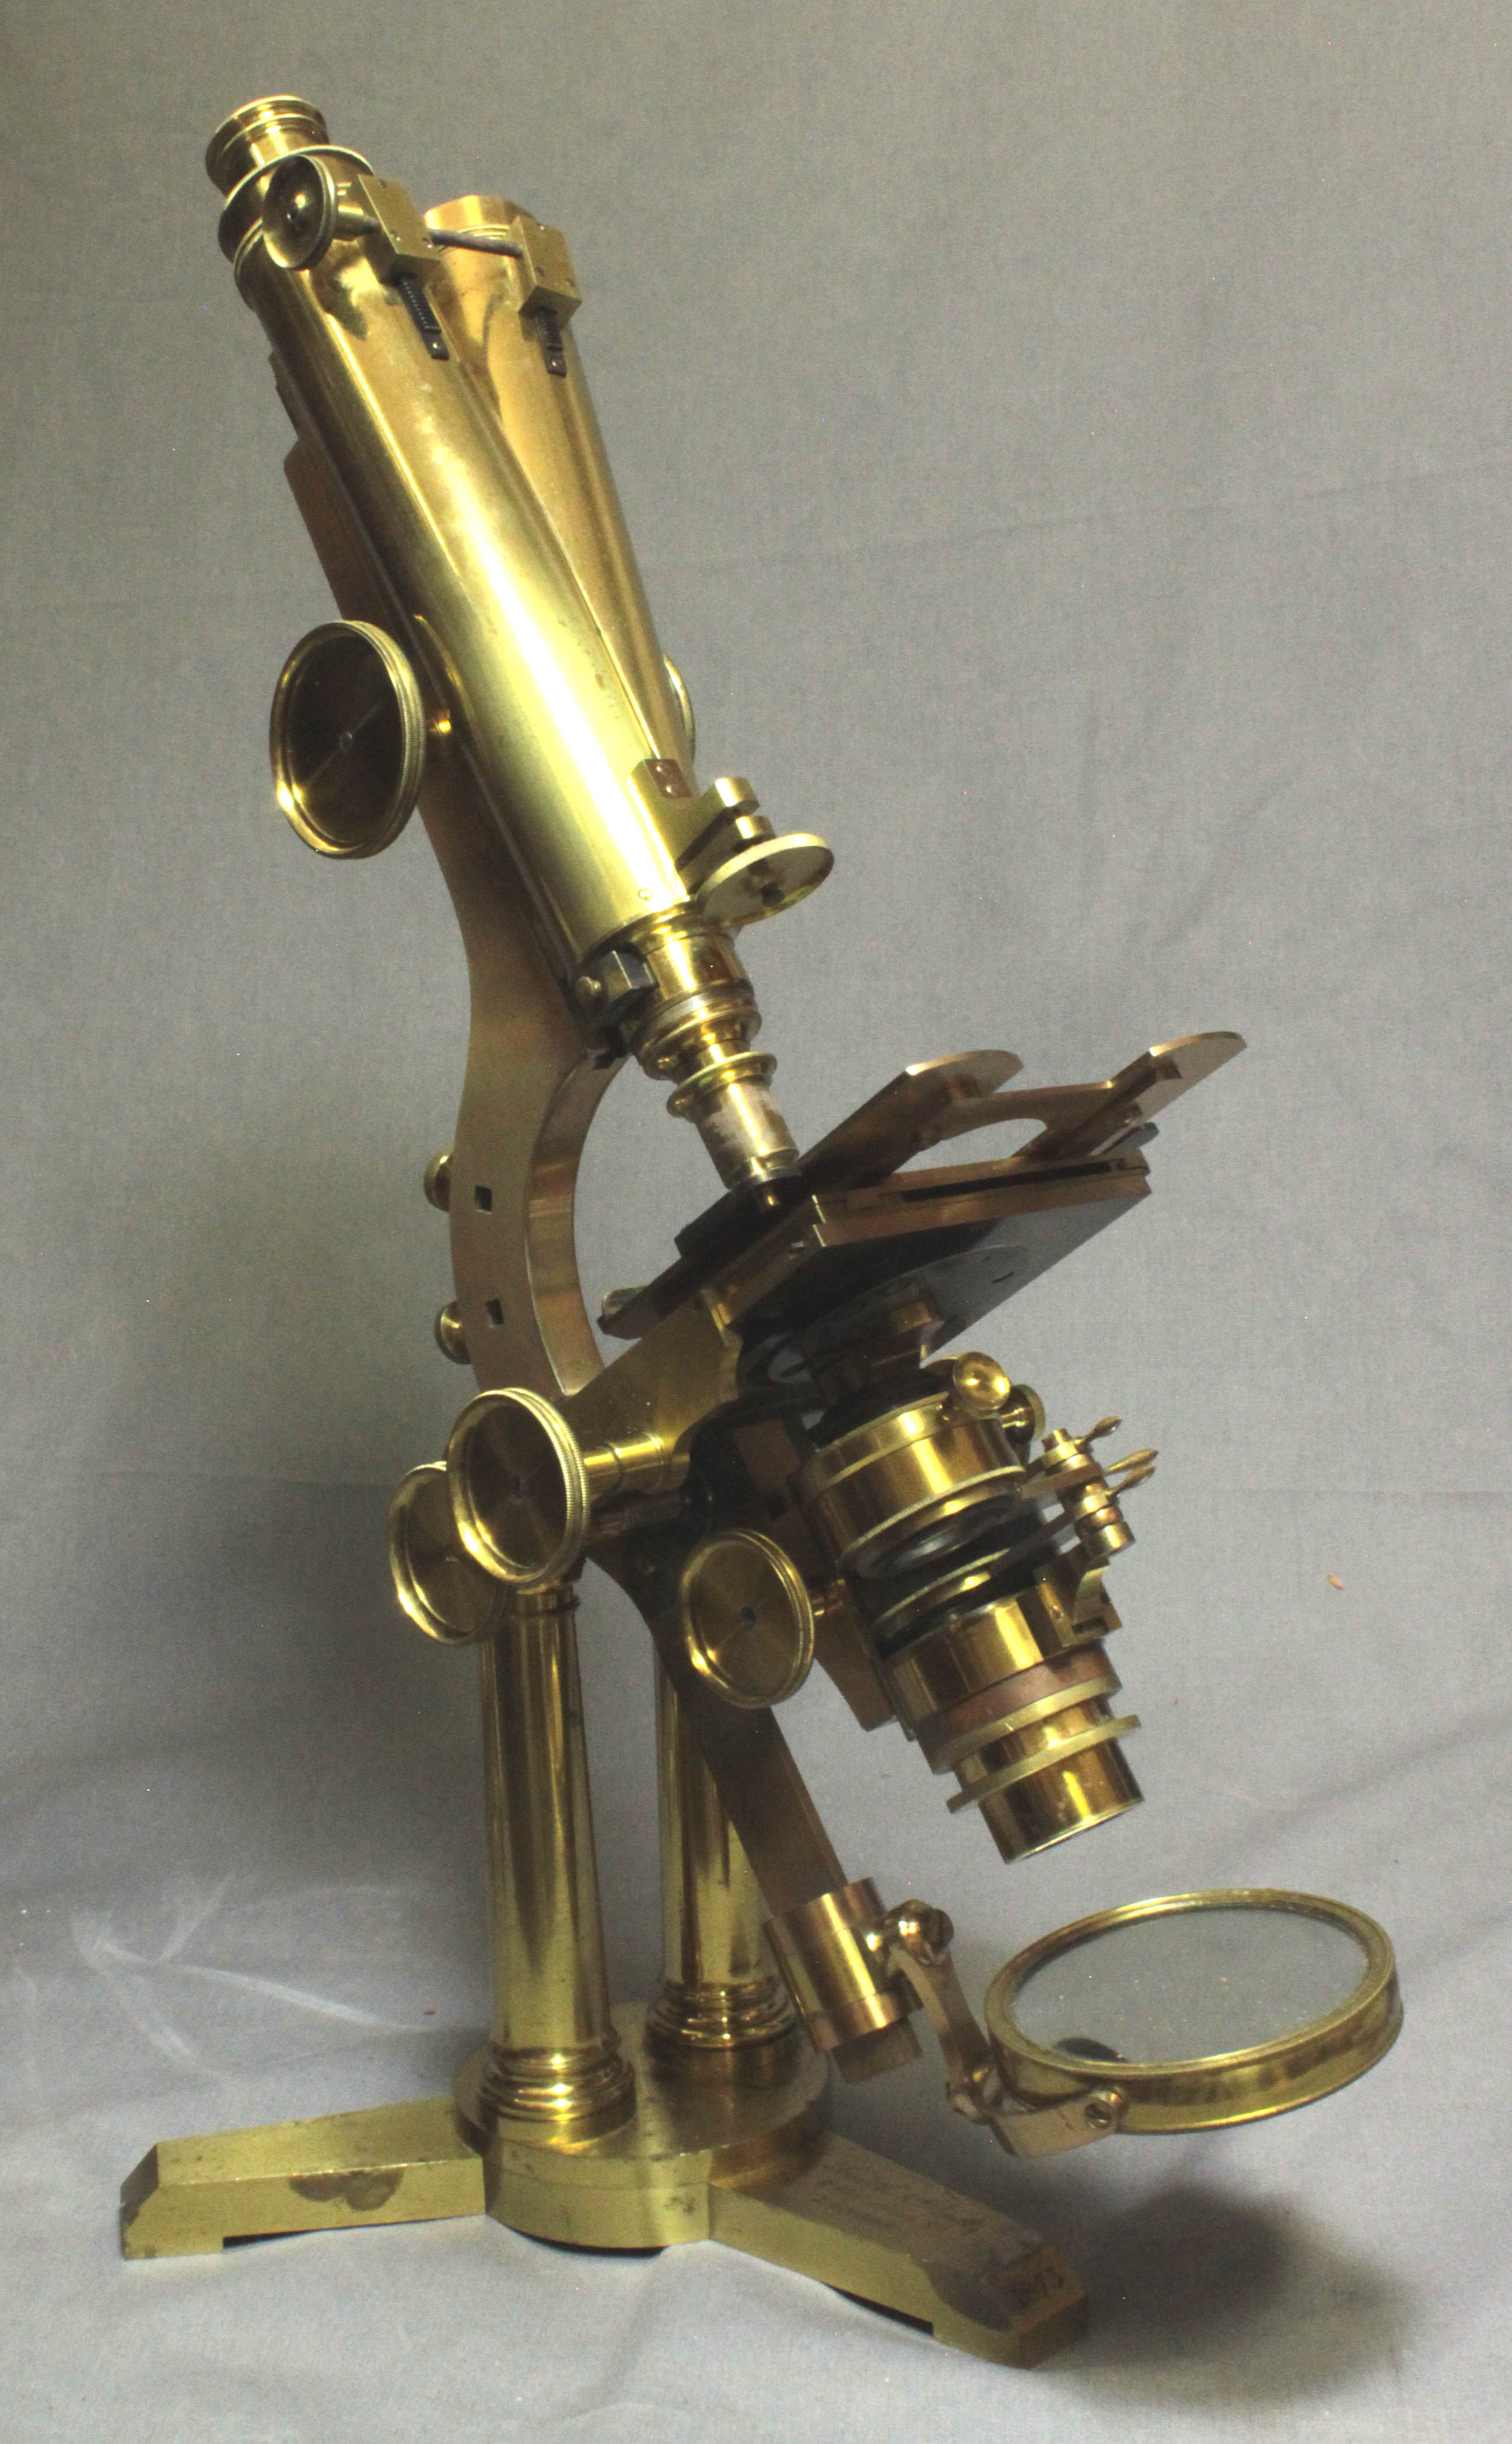 Smith & Beck Best No 1 microscope